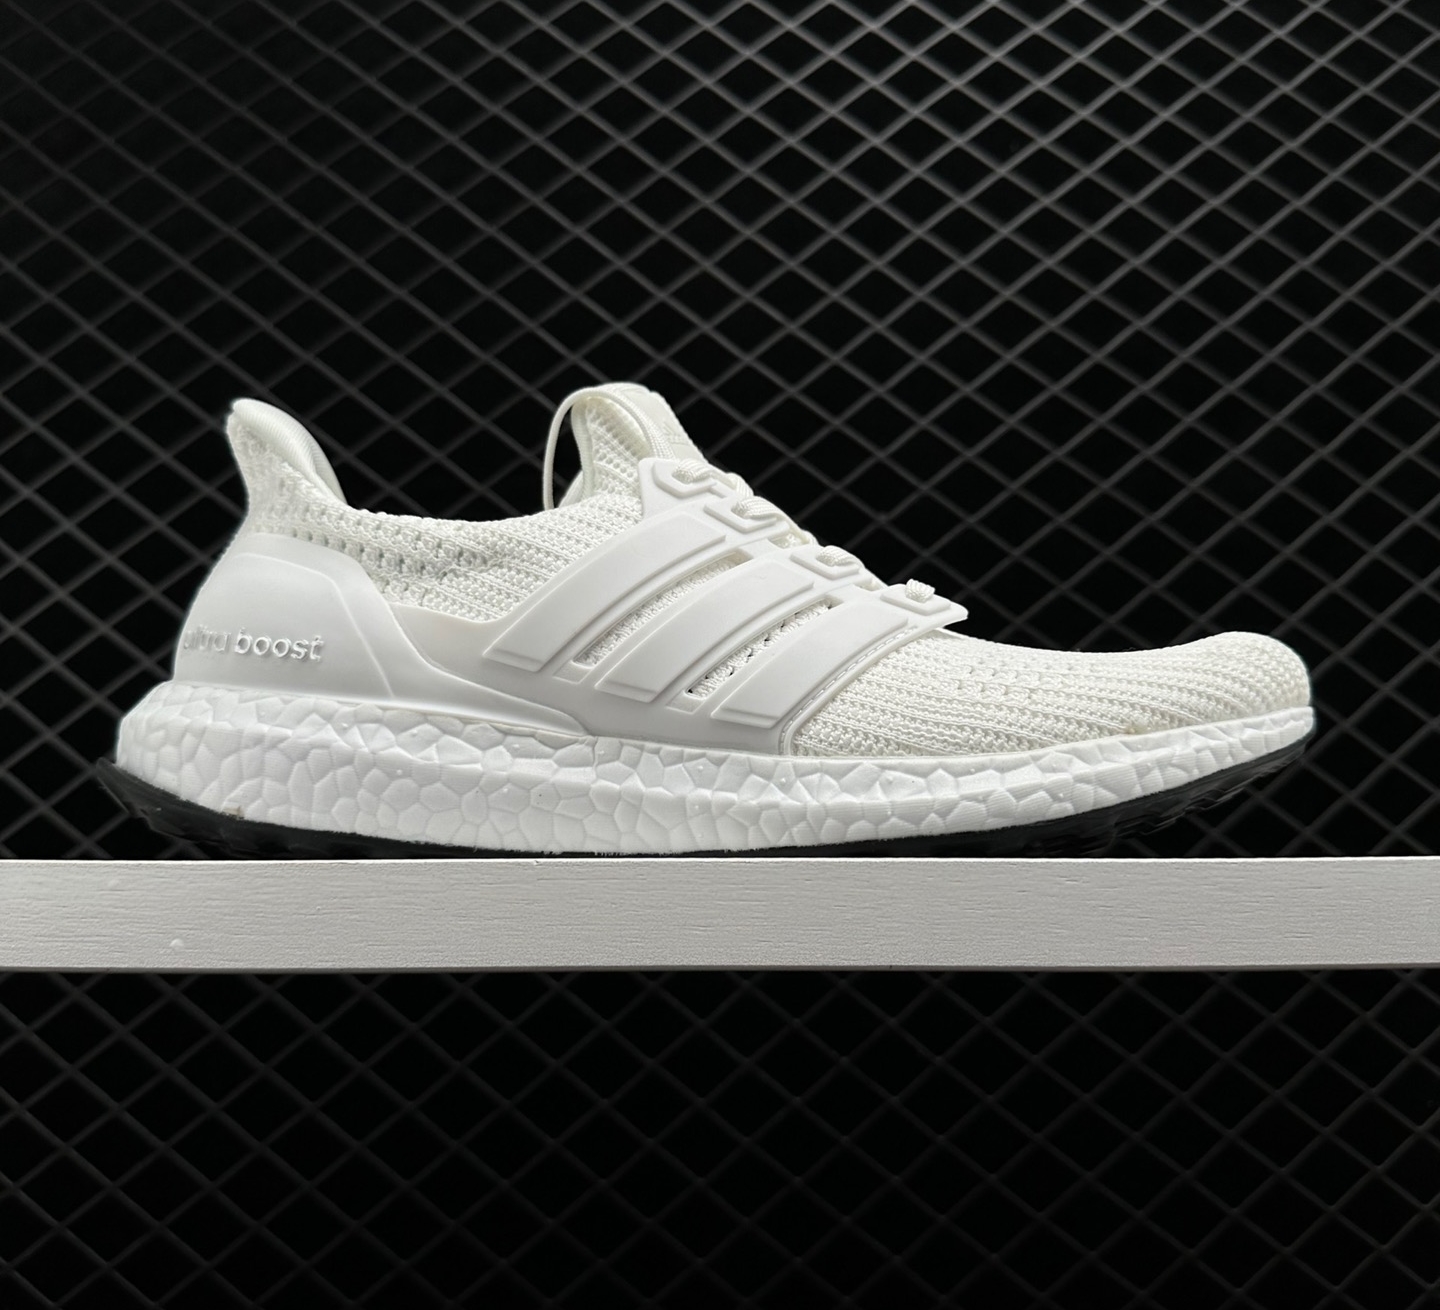 Adidas UltraBoost 4.0 DNA 'Cloud White' FY9120 - Shop Now!